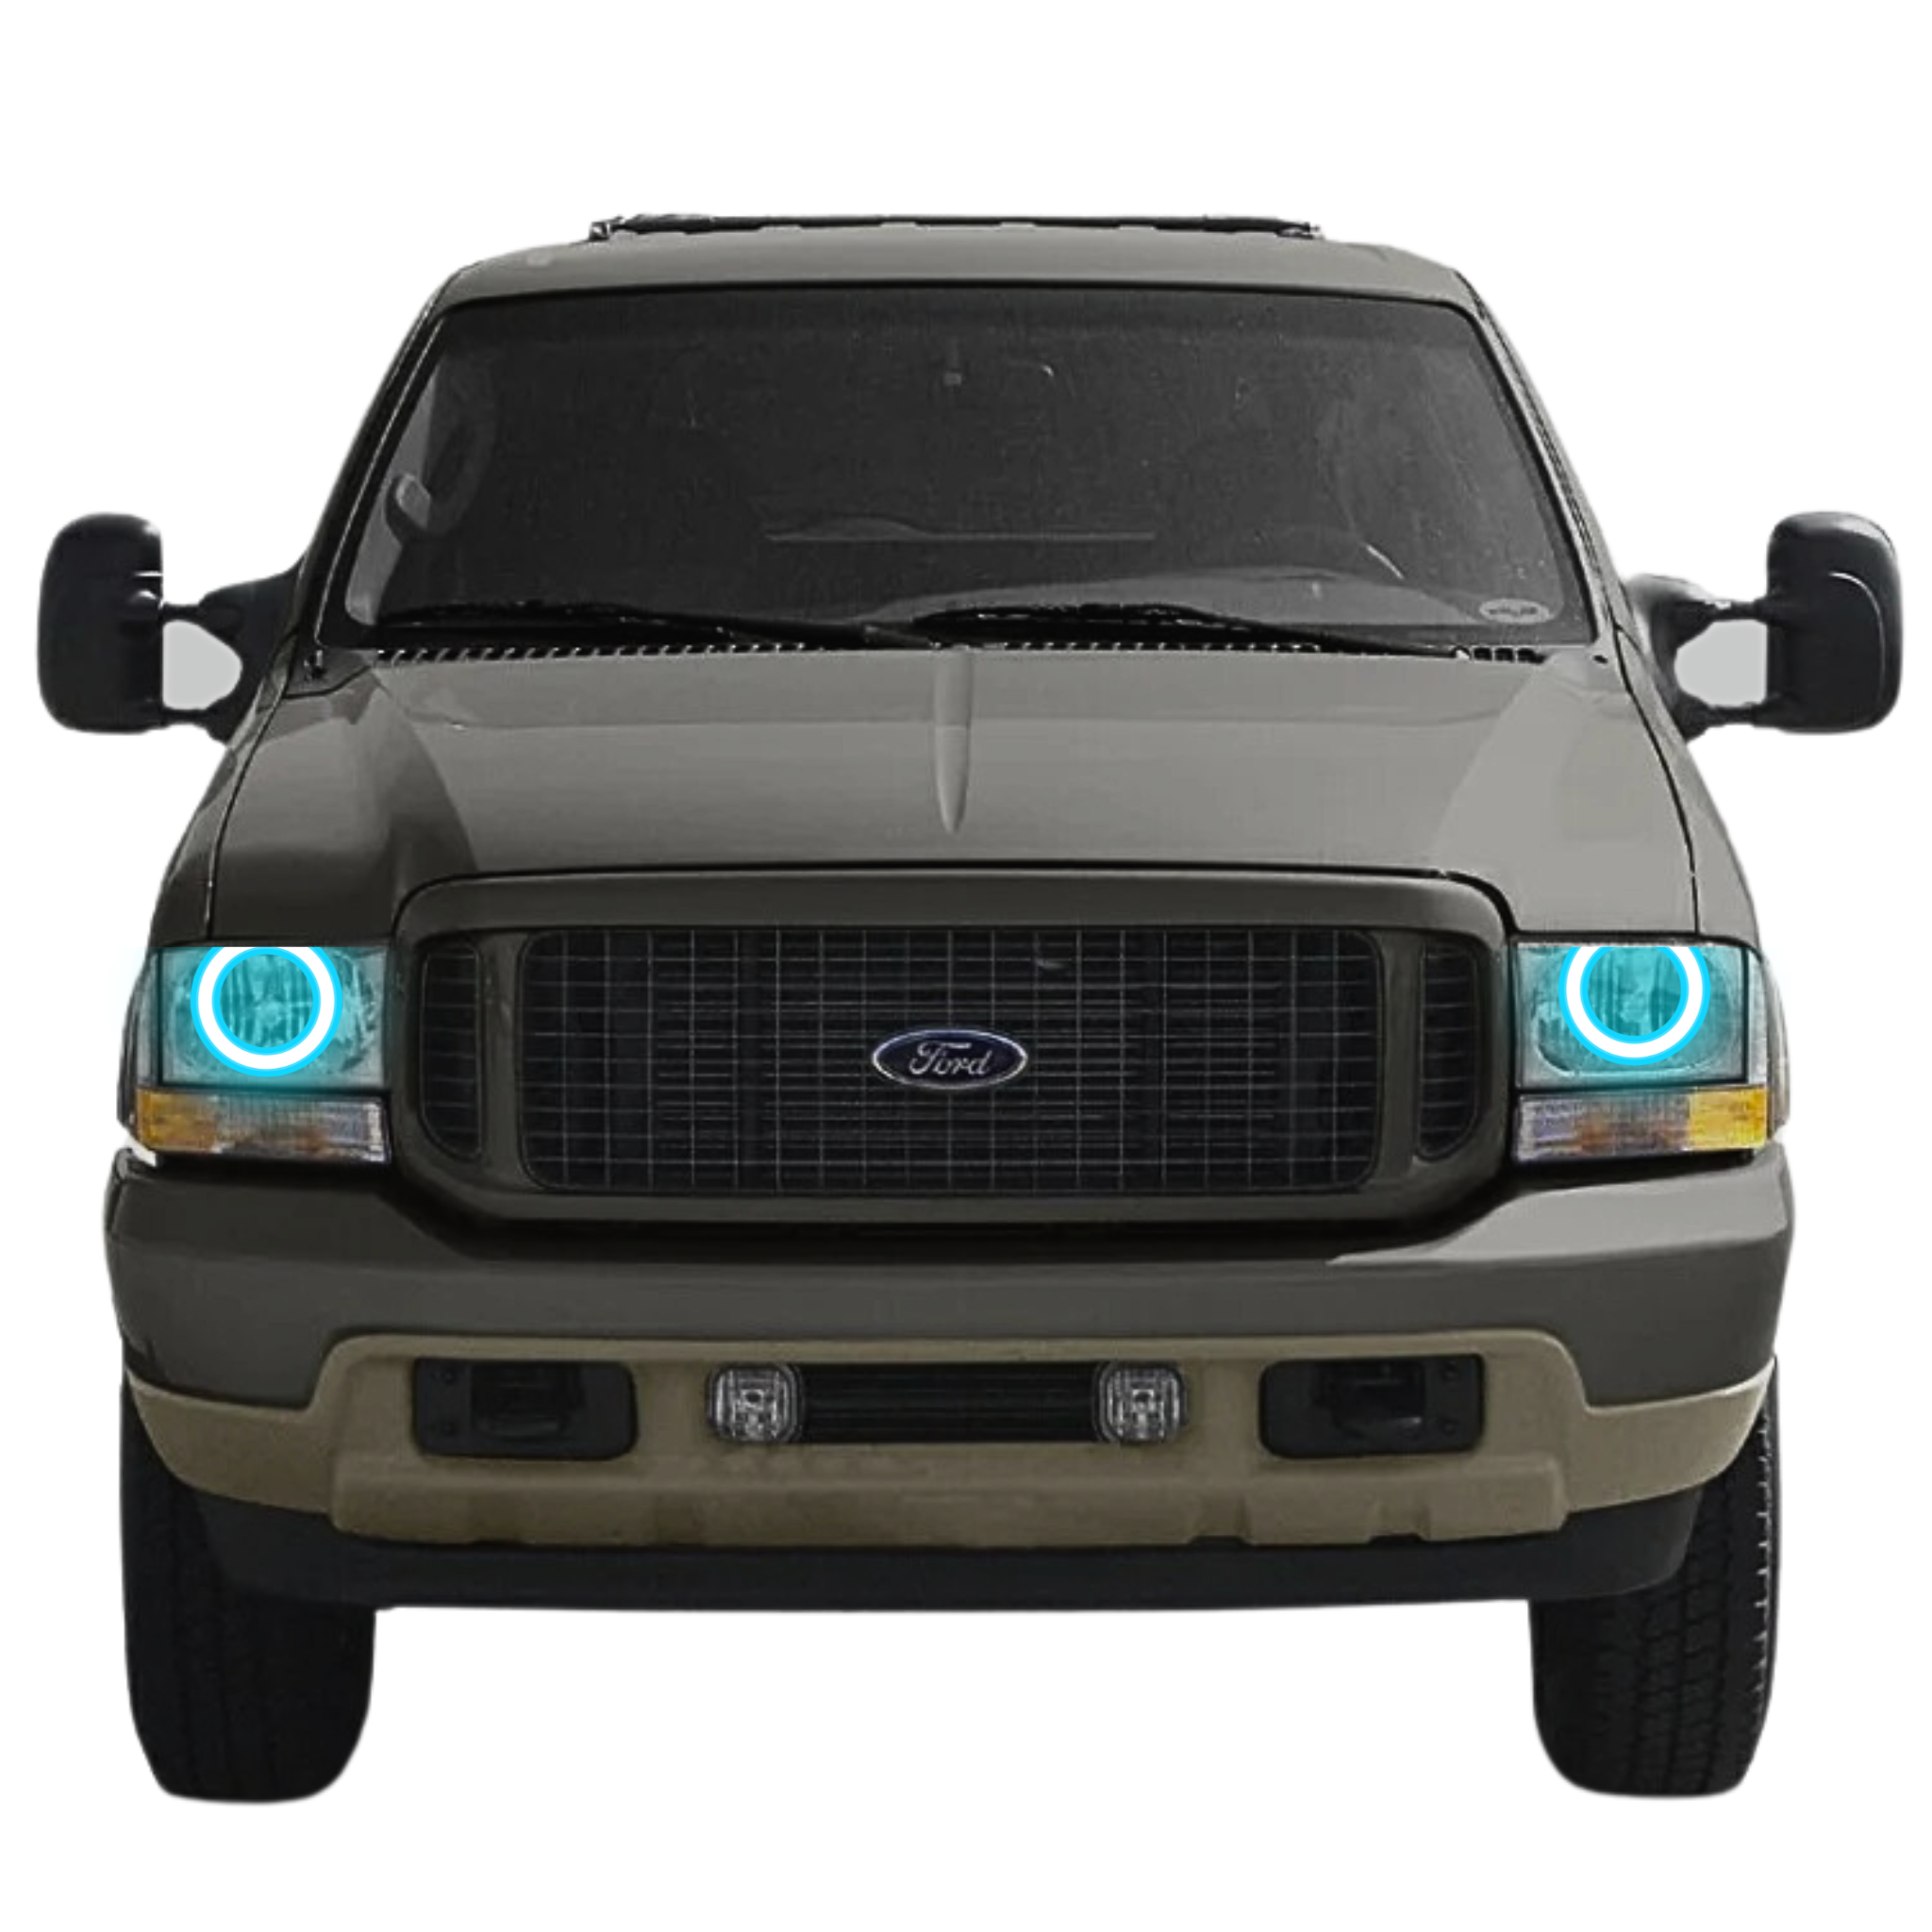 2000-2004 Ford Excursion Multicolor Halo Kit - RGB Halo Kits Multicolor Flow Series Color Chasing RGBWA LED headlight kit Colorshift Oracle Lighting Trendz OneUpLighting Morimoto theretrofitsource AutoLEDTech Diode Dynamics